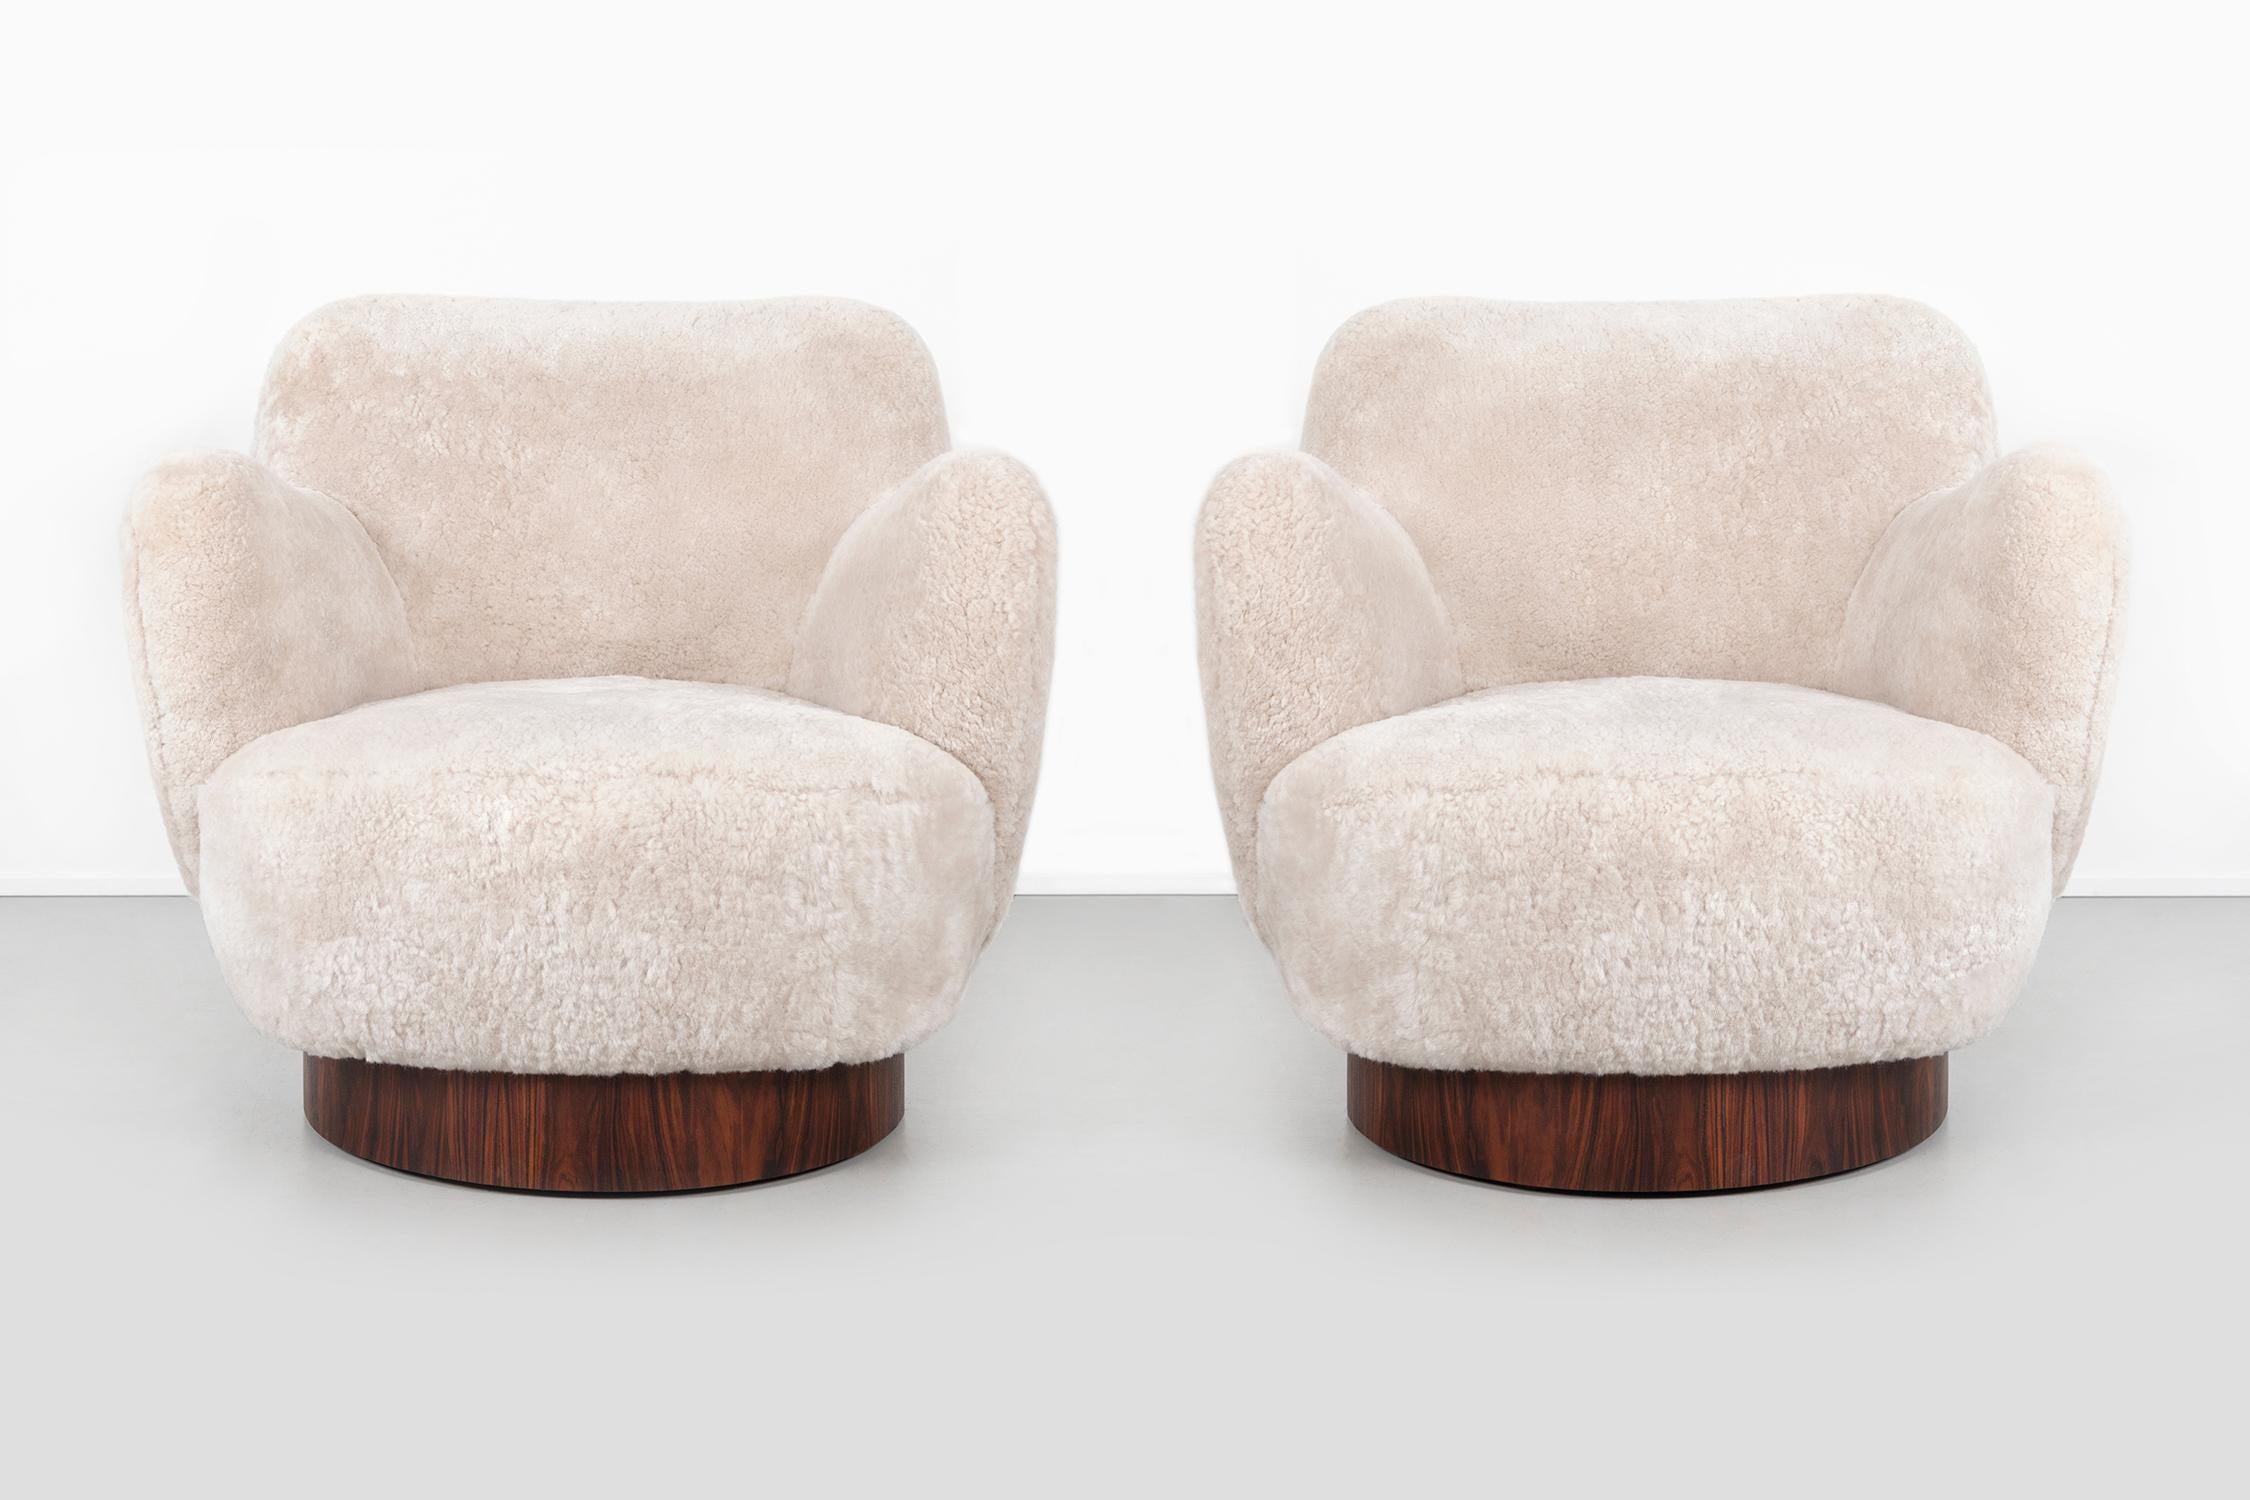 Set of two swivel chairs 

Designed by Vladimir Kagan

USA, circa 1970s

Reupholstered in shearling + rosewood

Measures: 28 ½” H x 32 ¼” W x 29“ D x 15“ seat height

Sold as a set or individually.

  